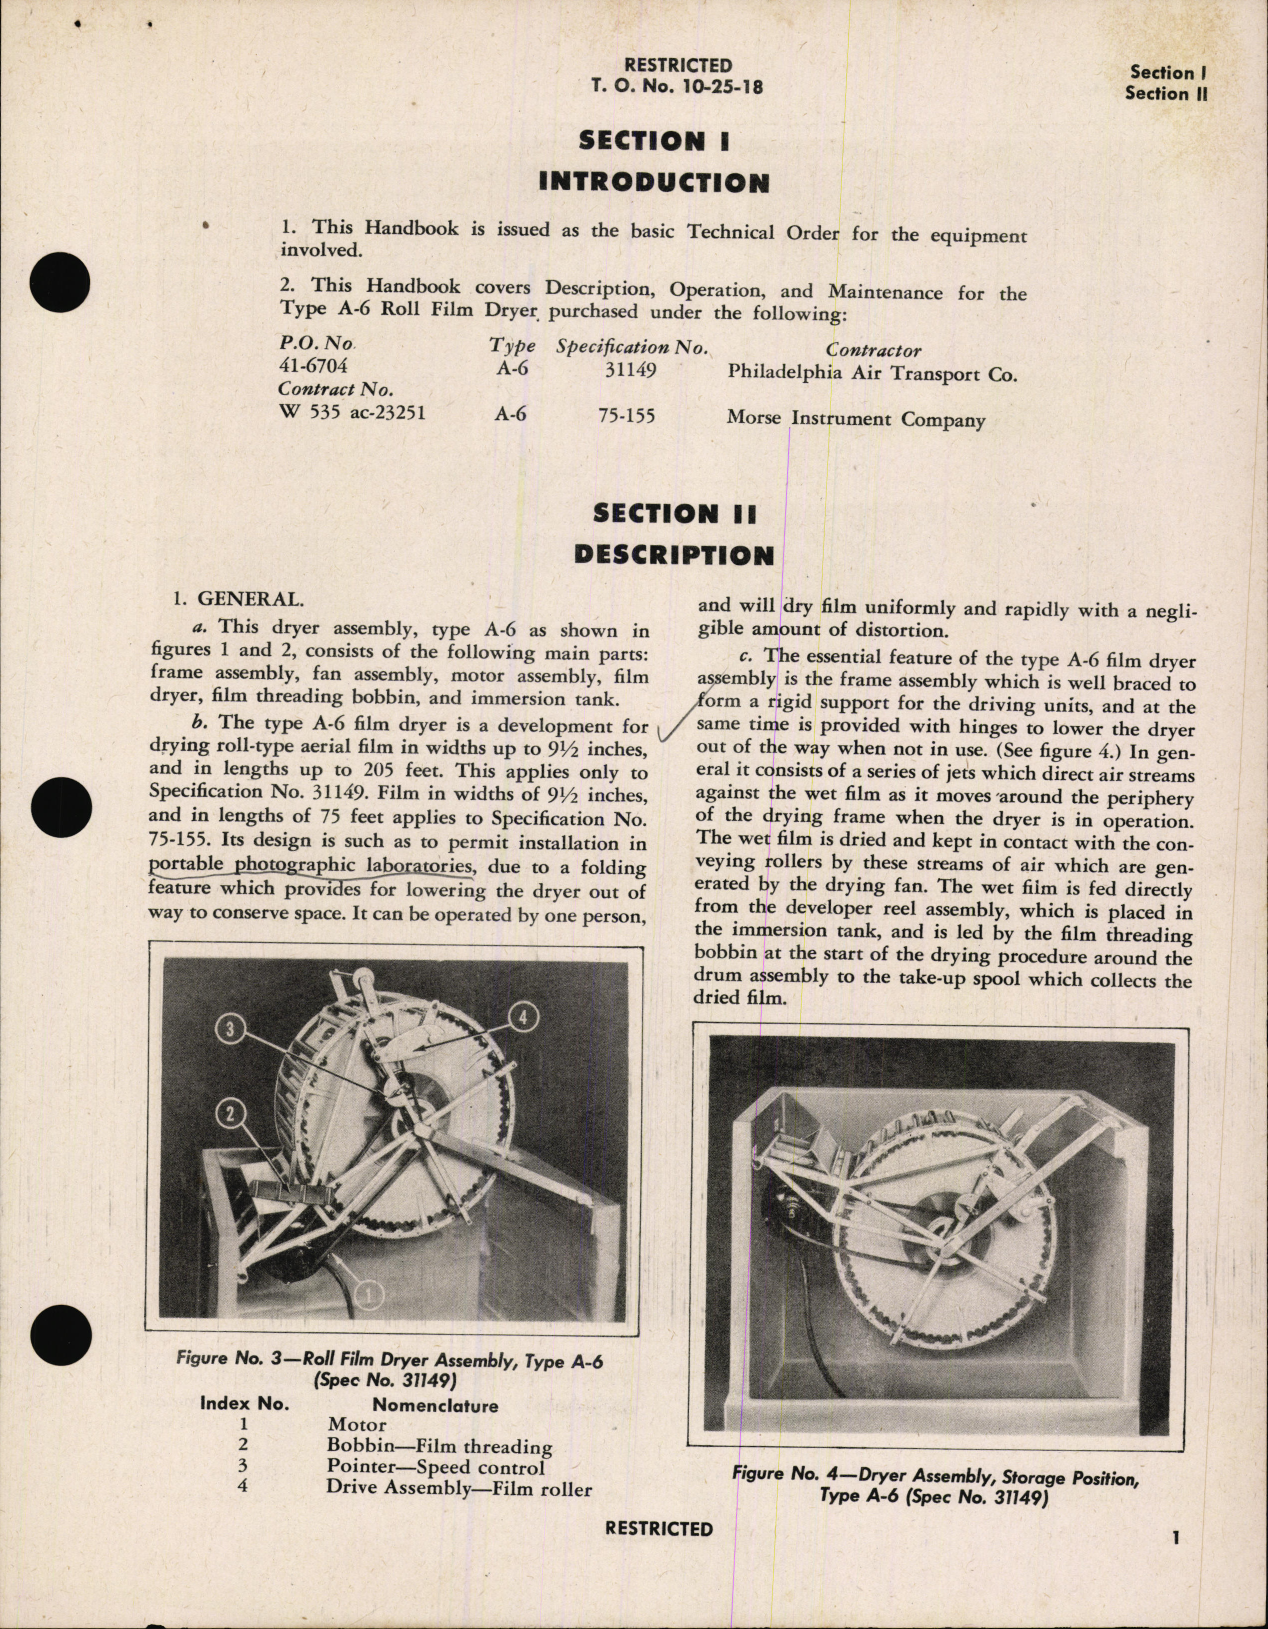 Sample page 5 from AirCorps Library document: Handbook of Instructions with Parts Catalog for Type A-6 Roll Film Dryer